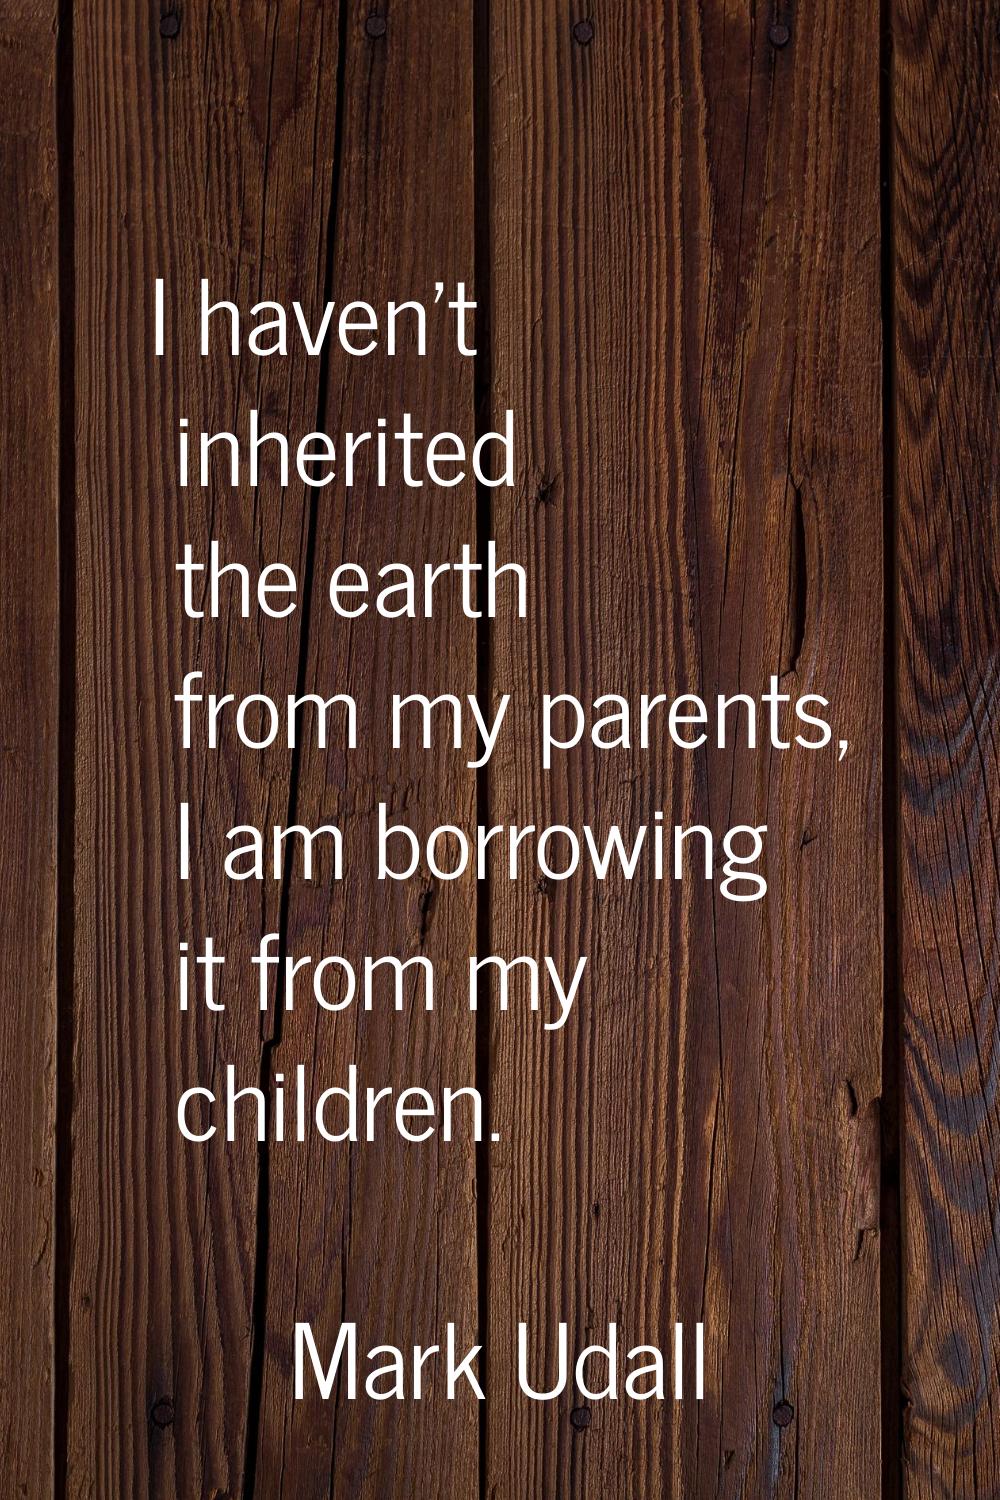 I haven't inherited the earth from my parents, I am borrowing it from my children.